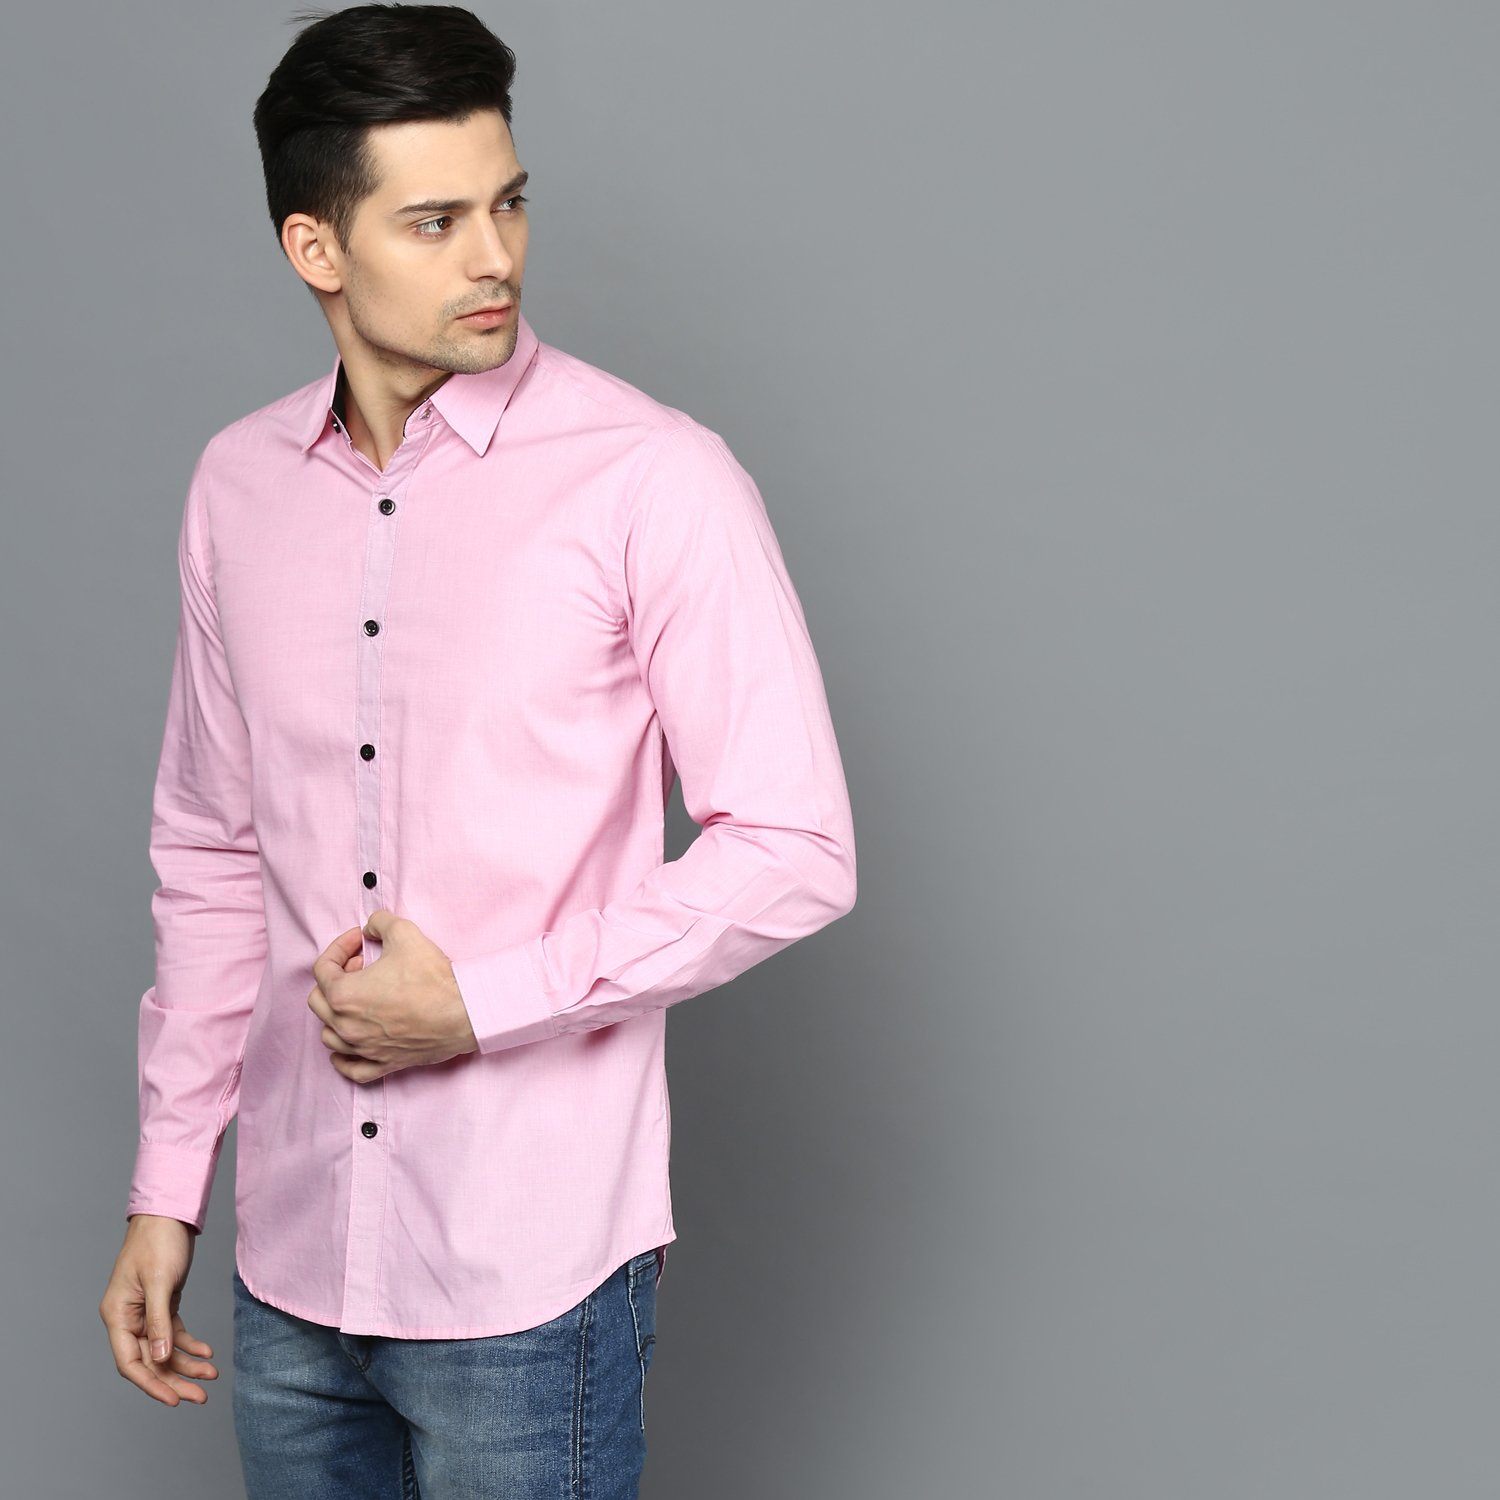 Pastel Pink Button down Shirt with Contrast Buttons